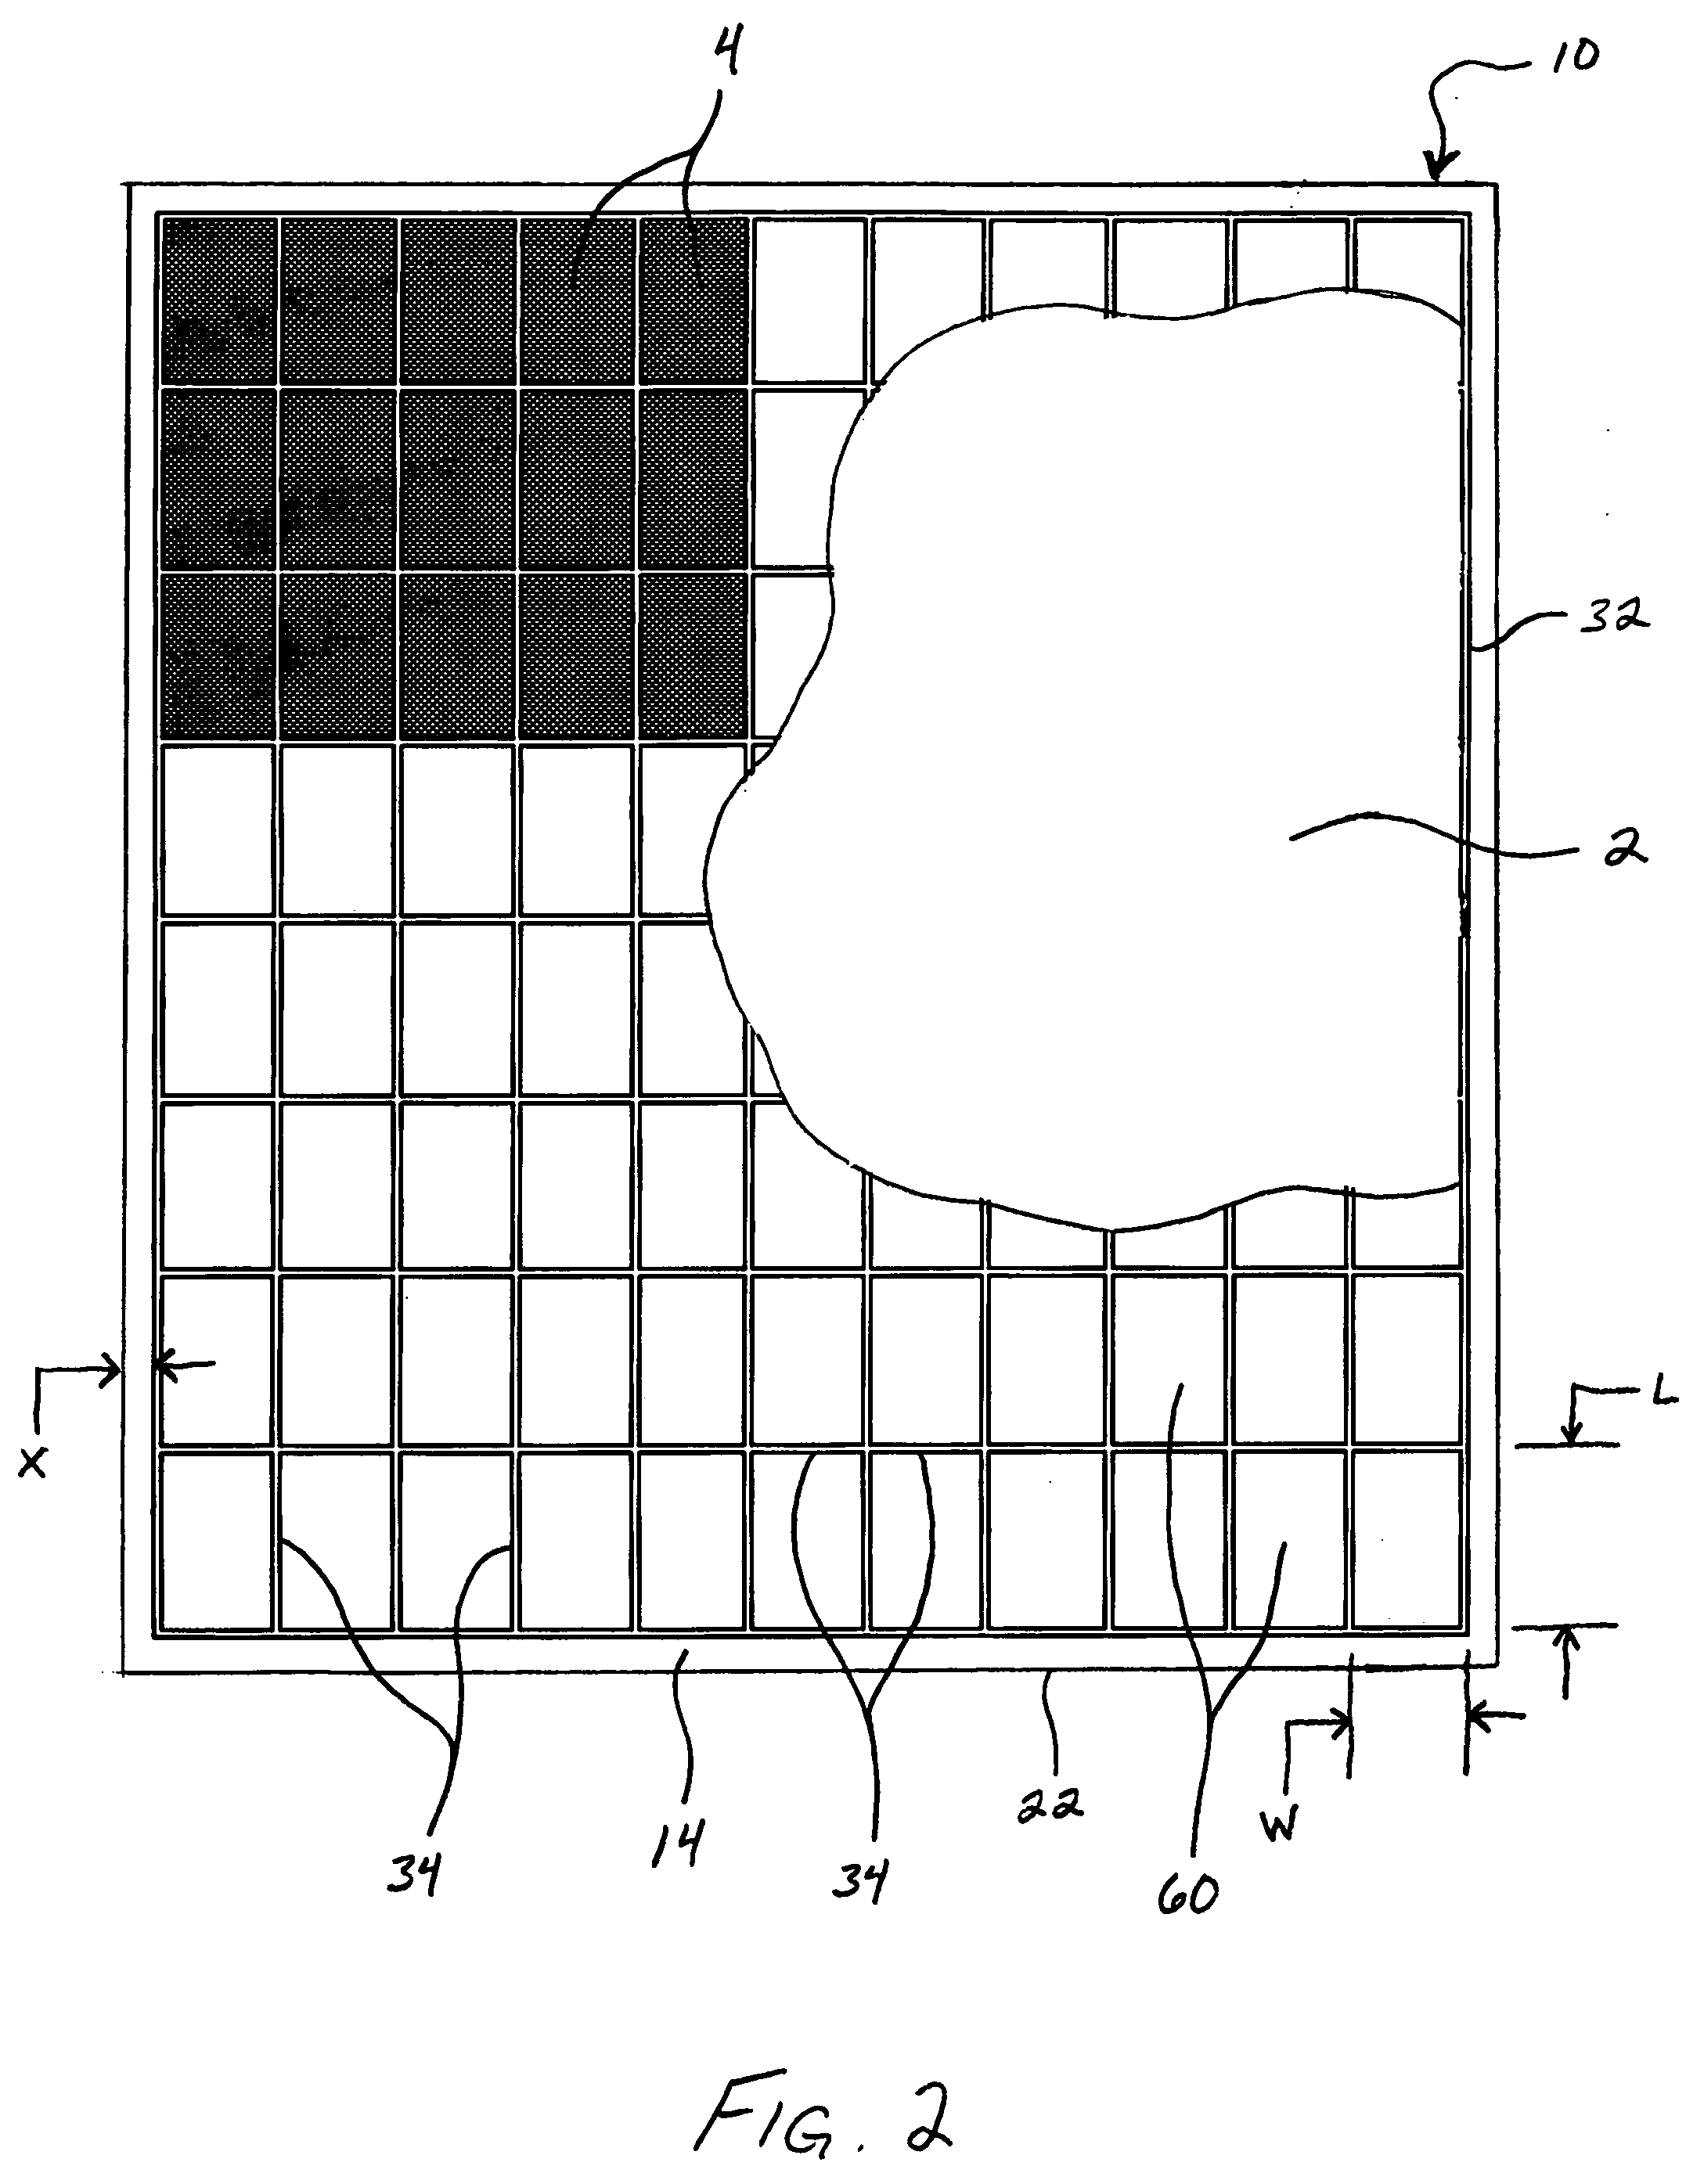 Method and system for preparing a jerky food product